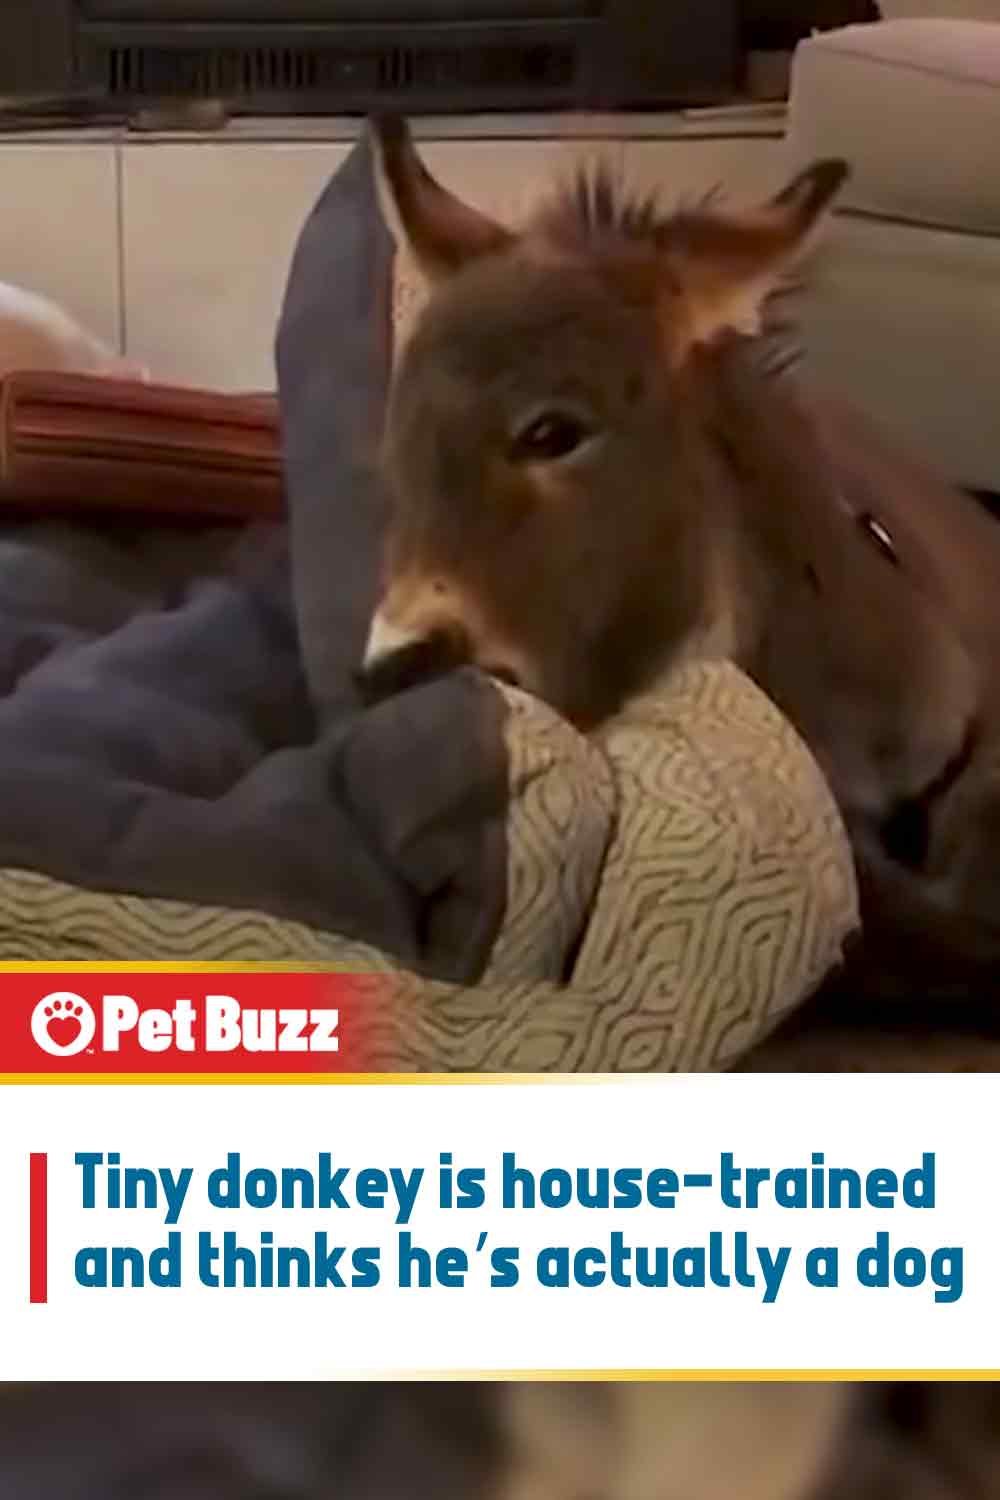 Tiny donkey is house-trained and thinks he’s actually a dog